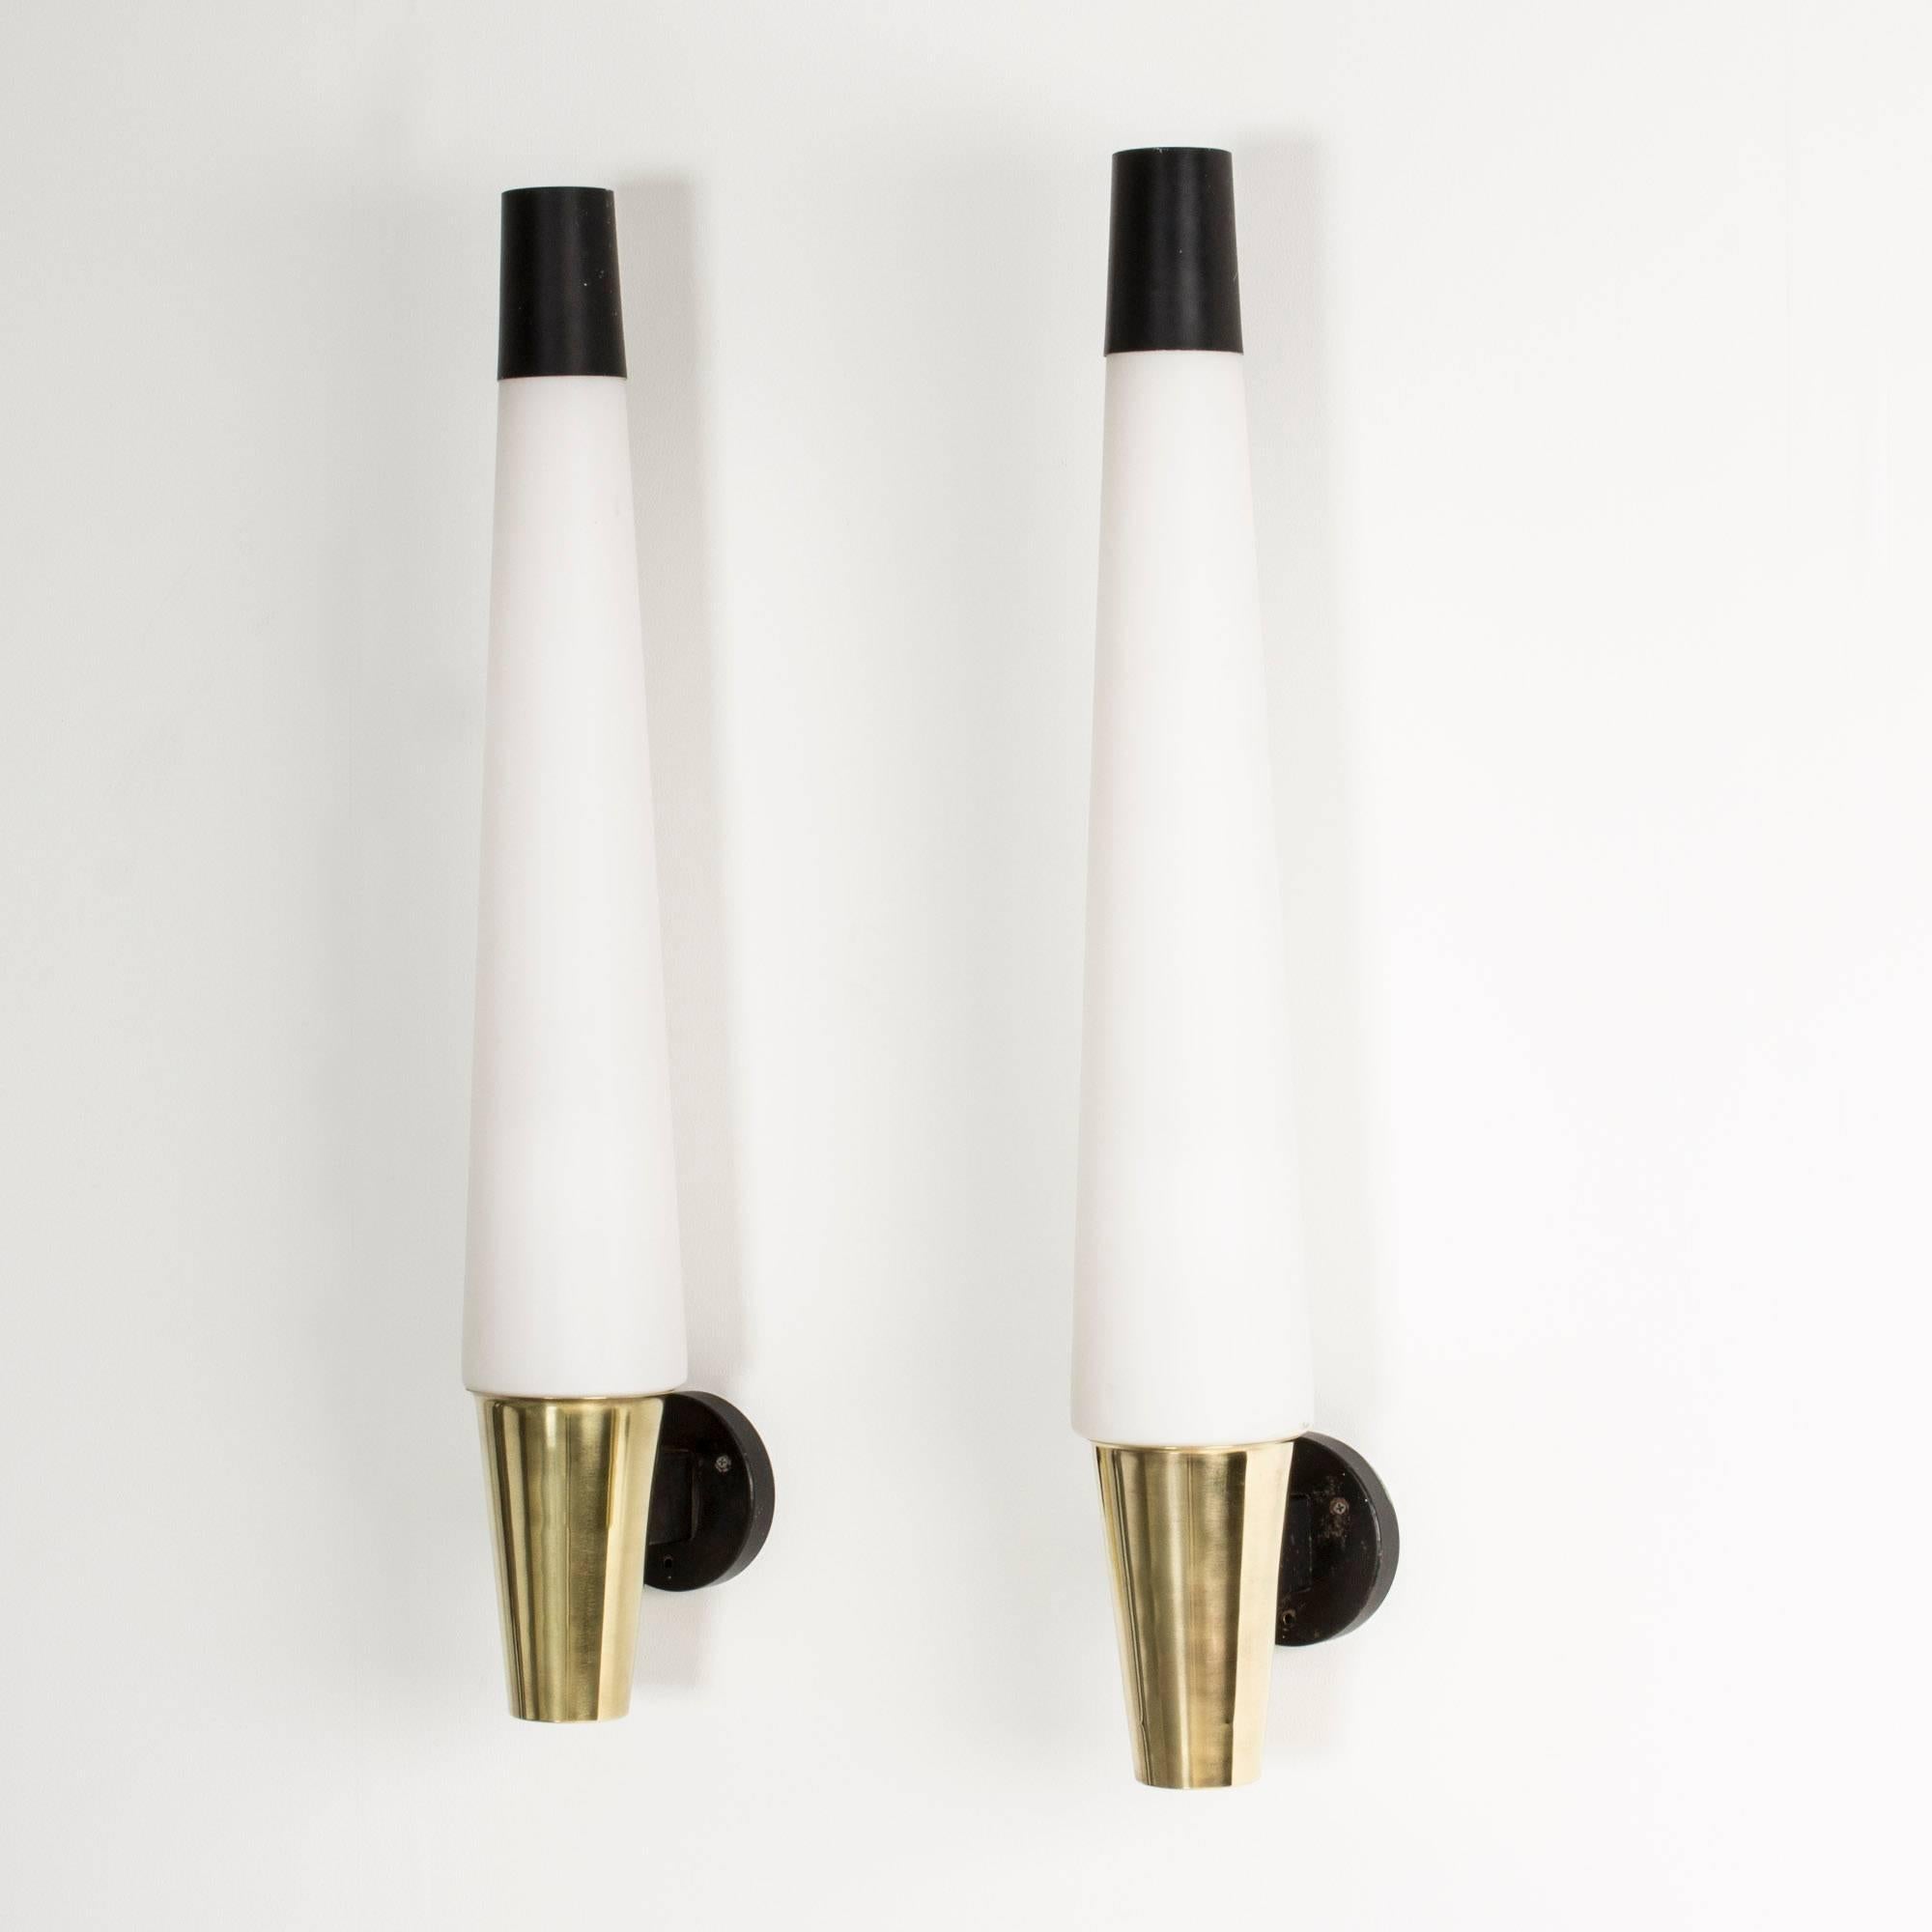 Pair of amazing, oversized wall lamps, made in Sweden in the 1950s. Slightly cone shaped brass bases and opaline glass shades, topped off with black lacquered metal cups. Round, black lacquered metal wall fastenings.